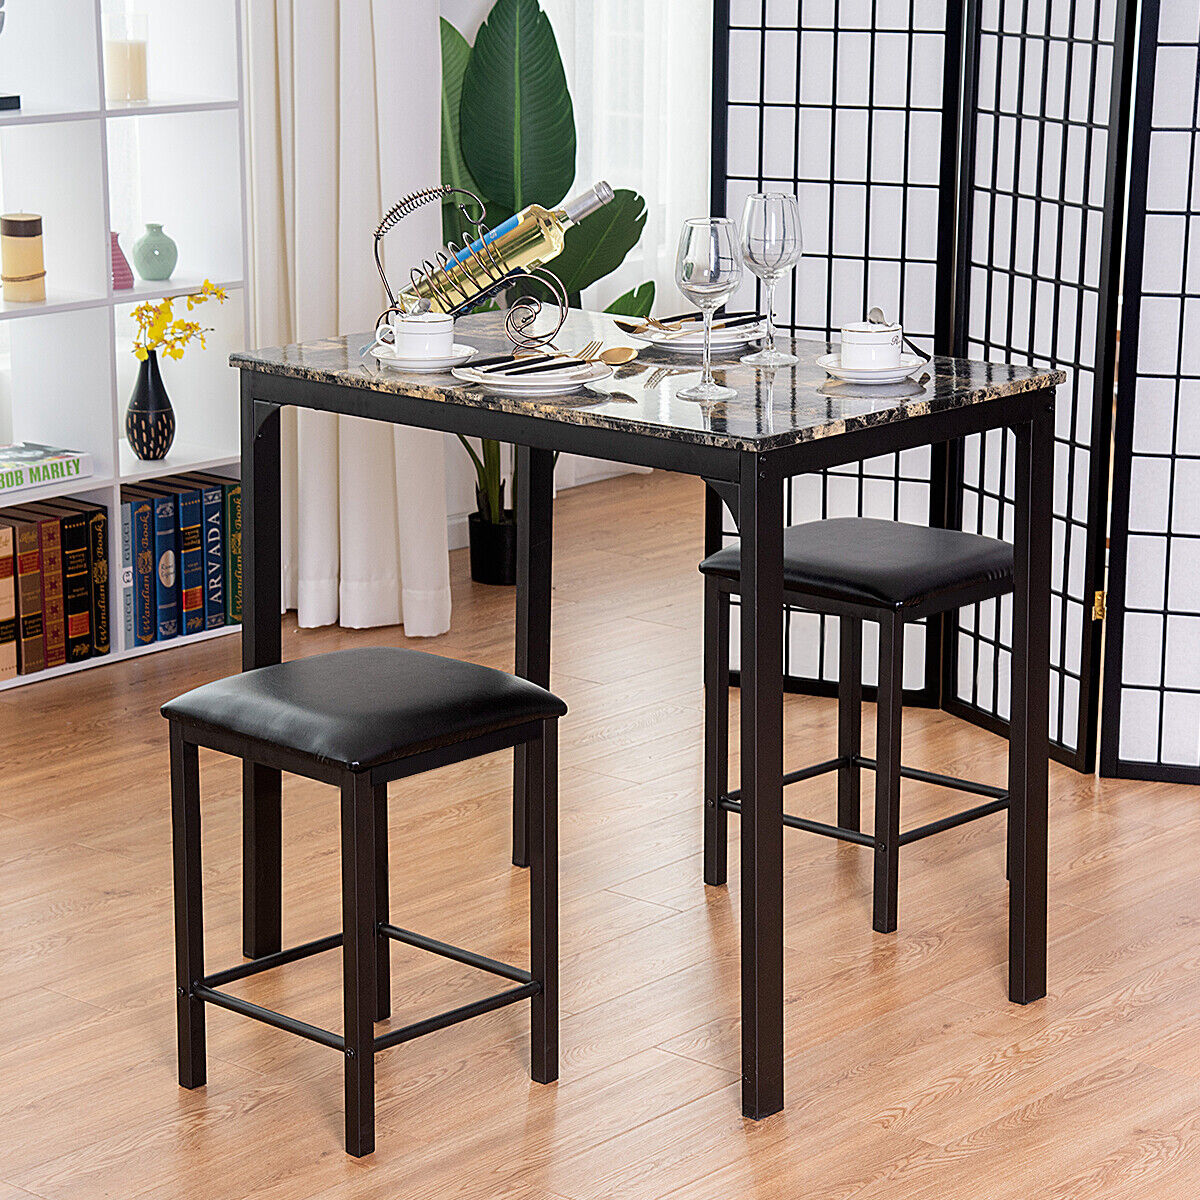 3 Piece Dining Table Set with 2 Faux Leather Backless Stools-Coffee